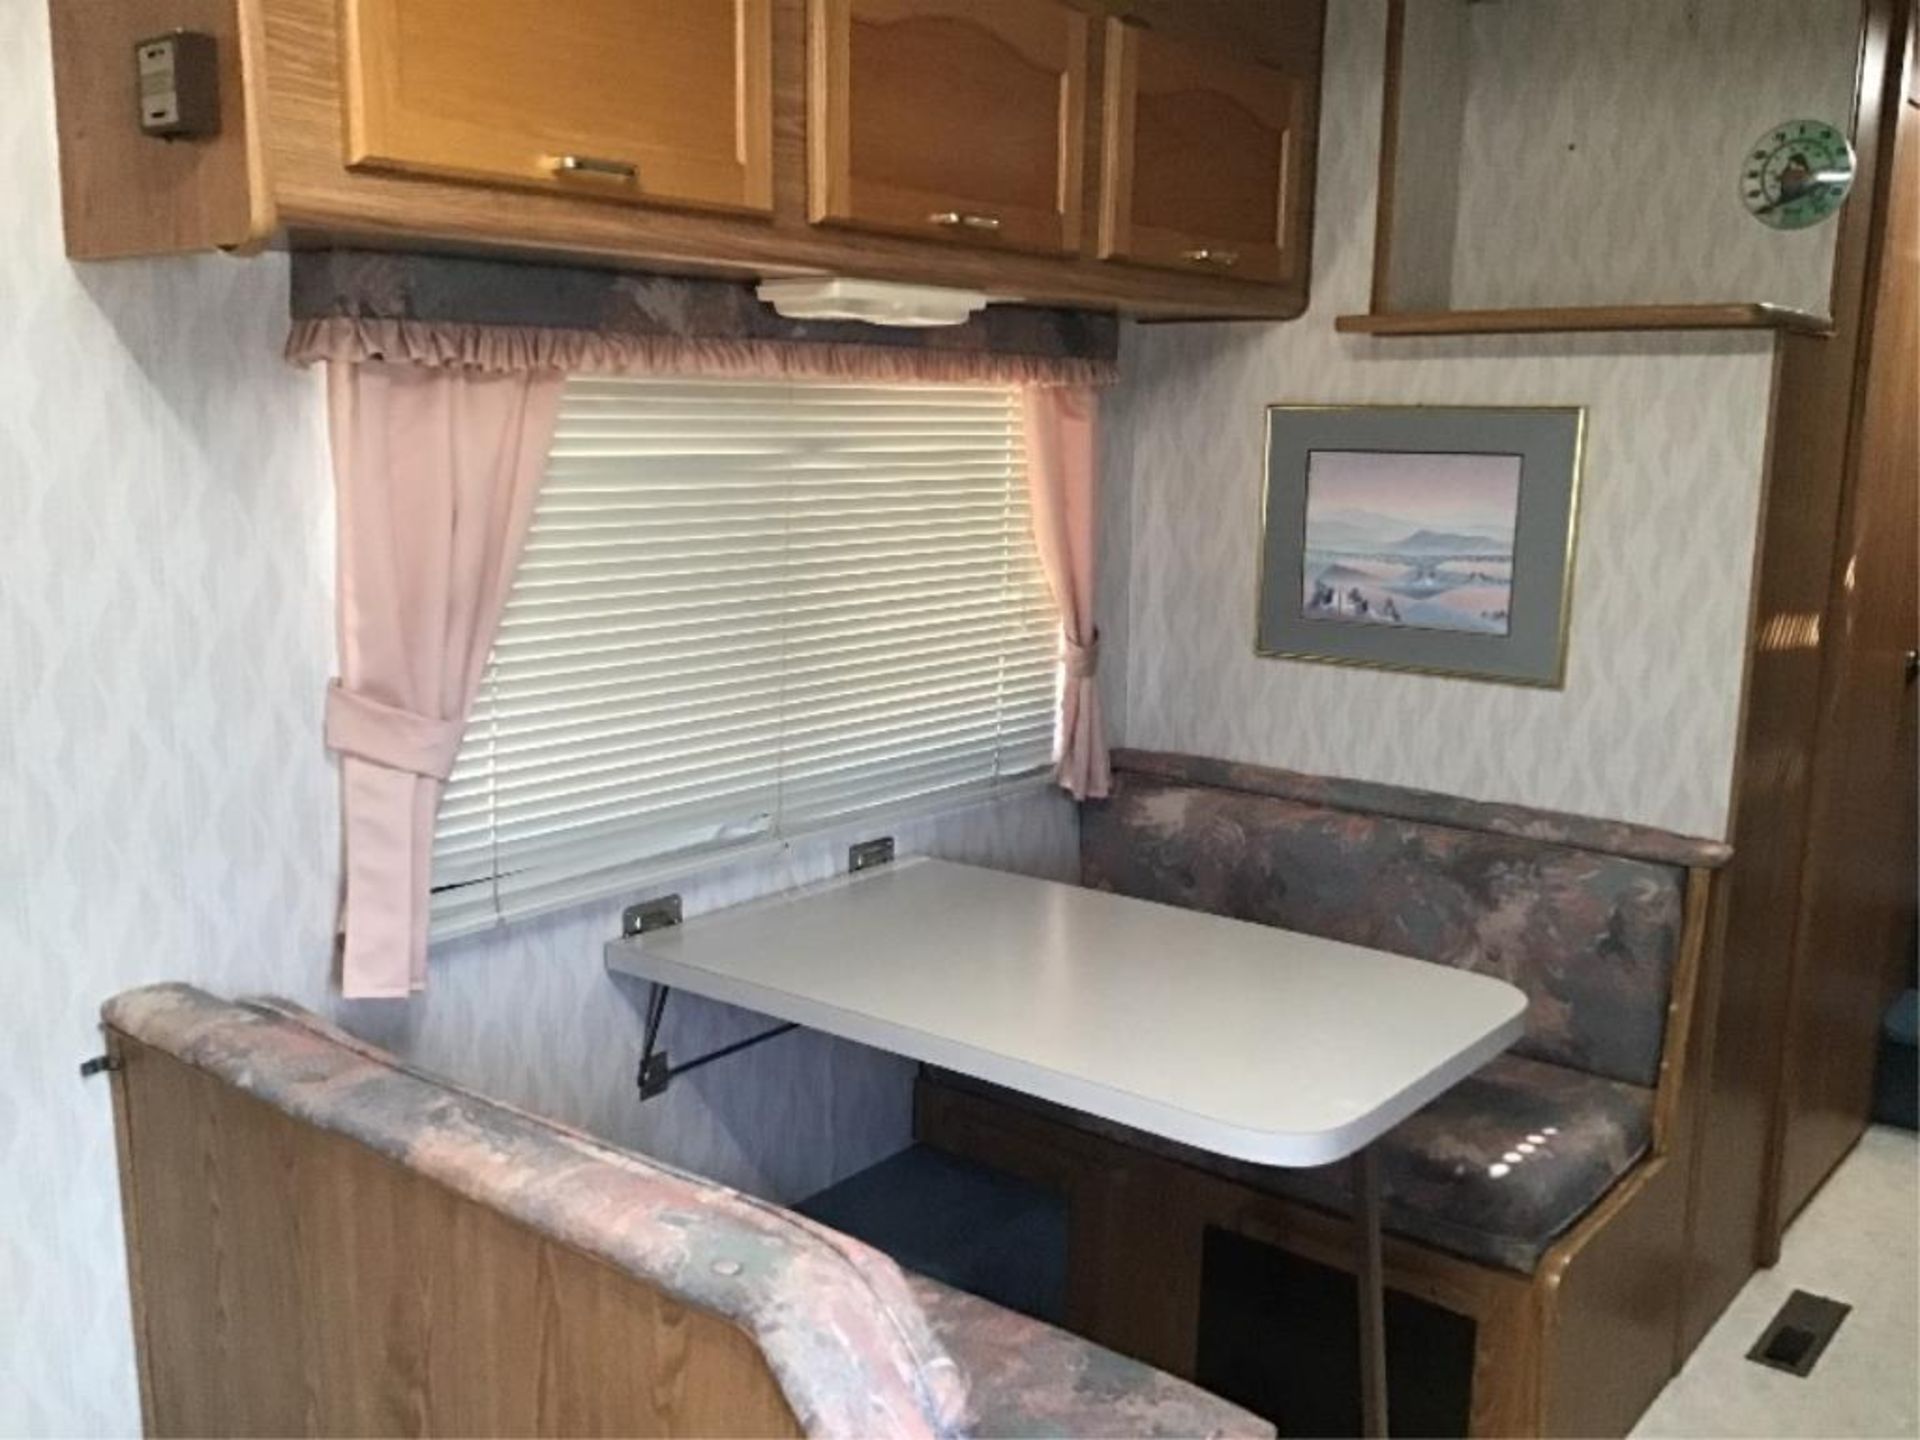 1993 Corsairs Excella 5th Wheel Holiday Trailer - Image 8 of 14